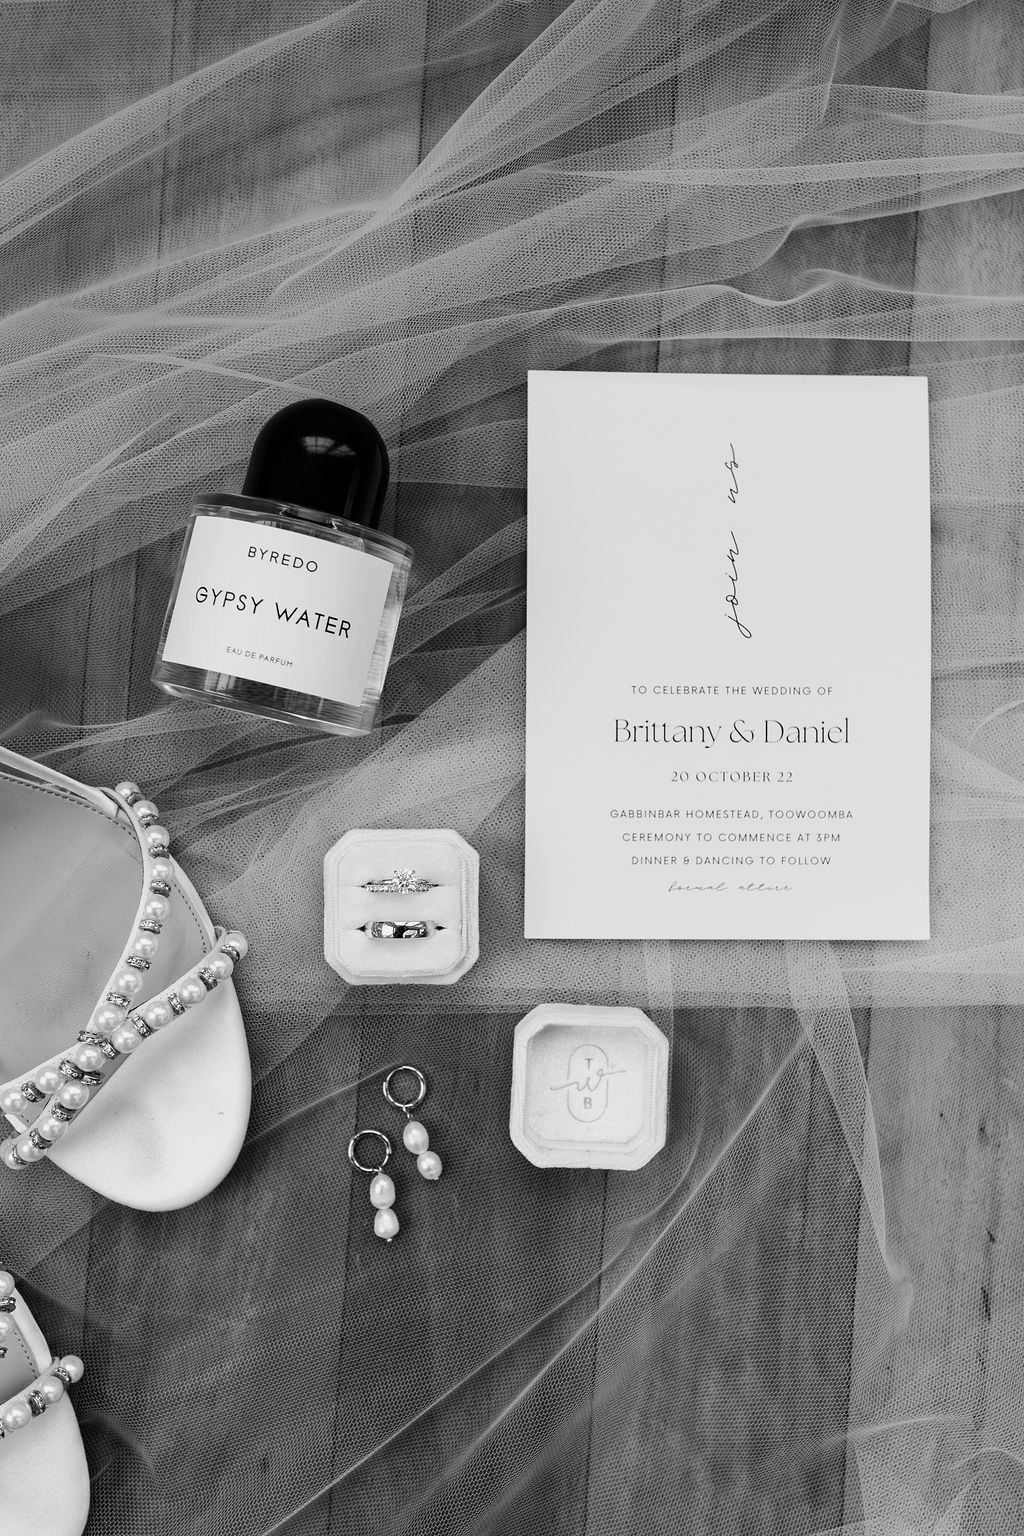 Wedding shoes and invitation